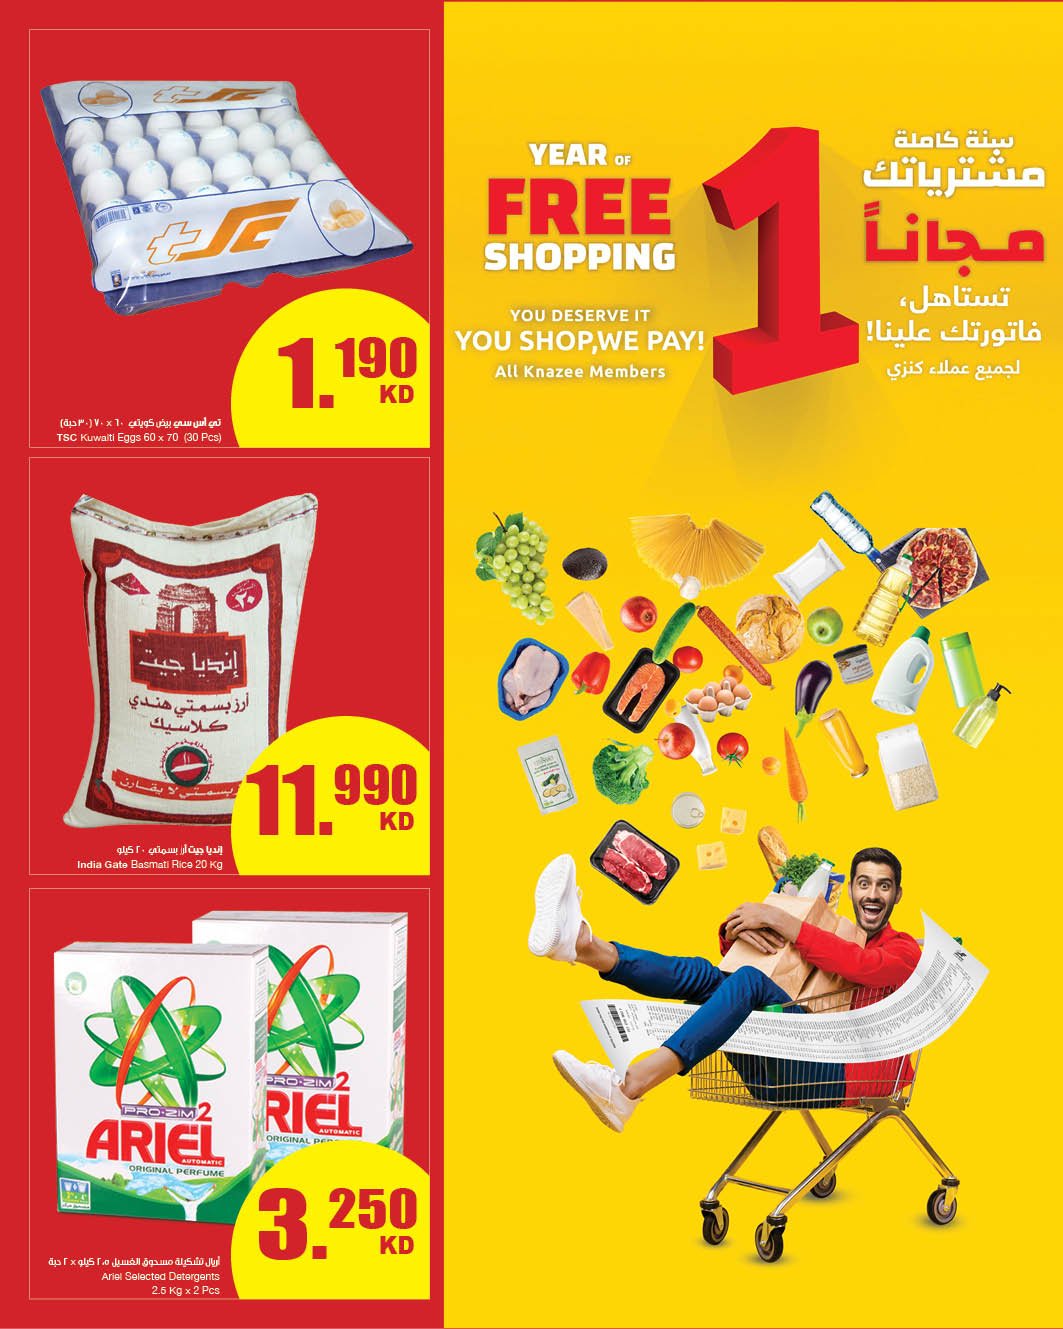 The Sultan Center Weekly Offers, Kuwait Sultan promotion Sale